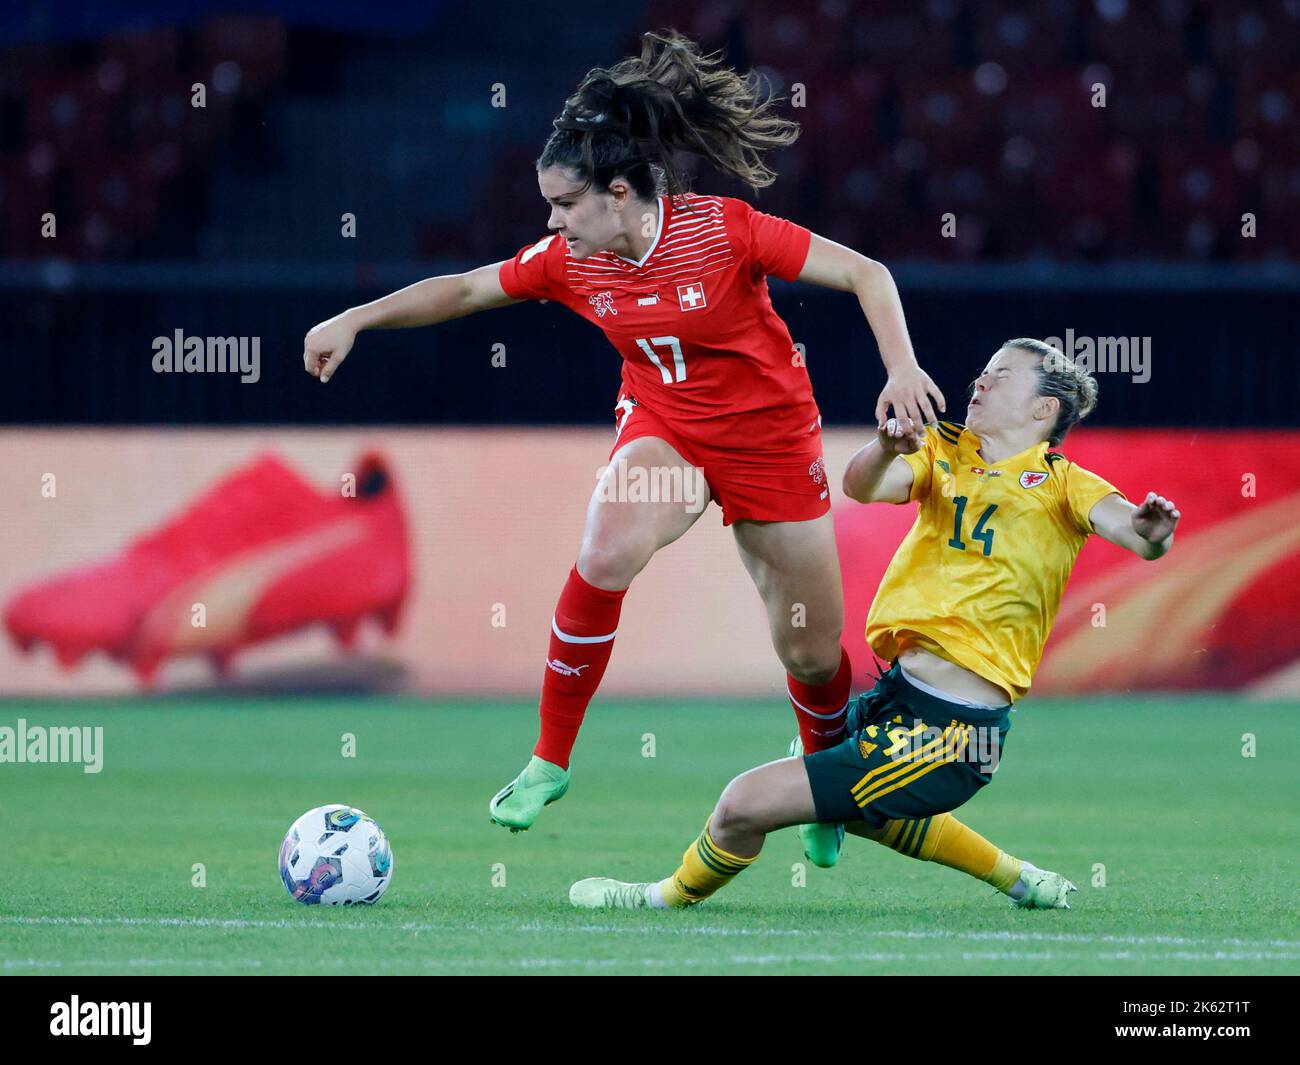 Soccer Football - FIFA Women's World Cup - UEFA Qualifiers - Switzerland v Wales - Stadion Letzigrund, Zurich, Switzerland - October 11, 2022 Switzerland's Svenja Folmli in action with Wales' Hailey Ladd REUTERS/Stefan Wermuth Stock Photo